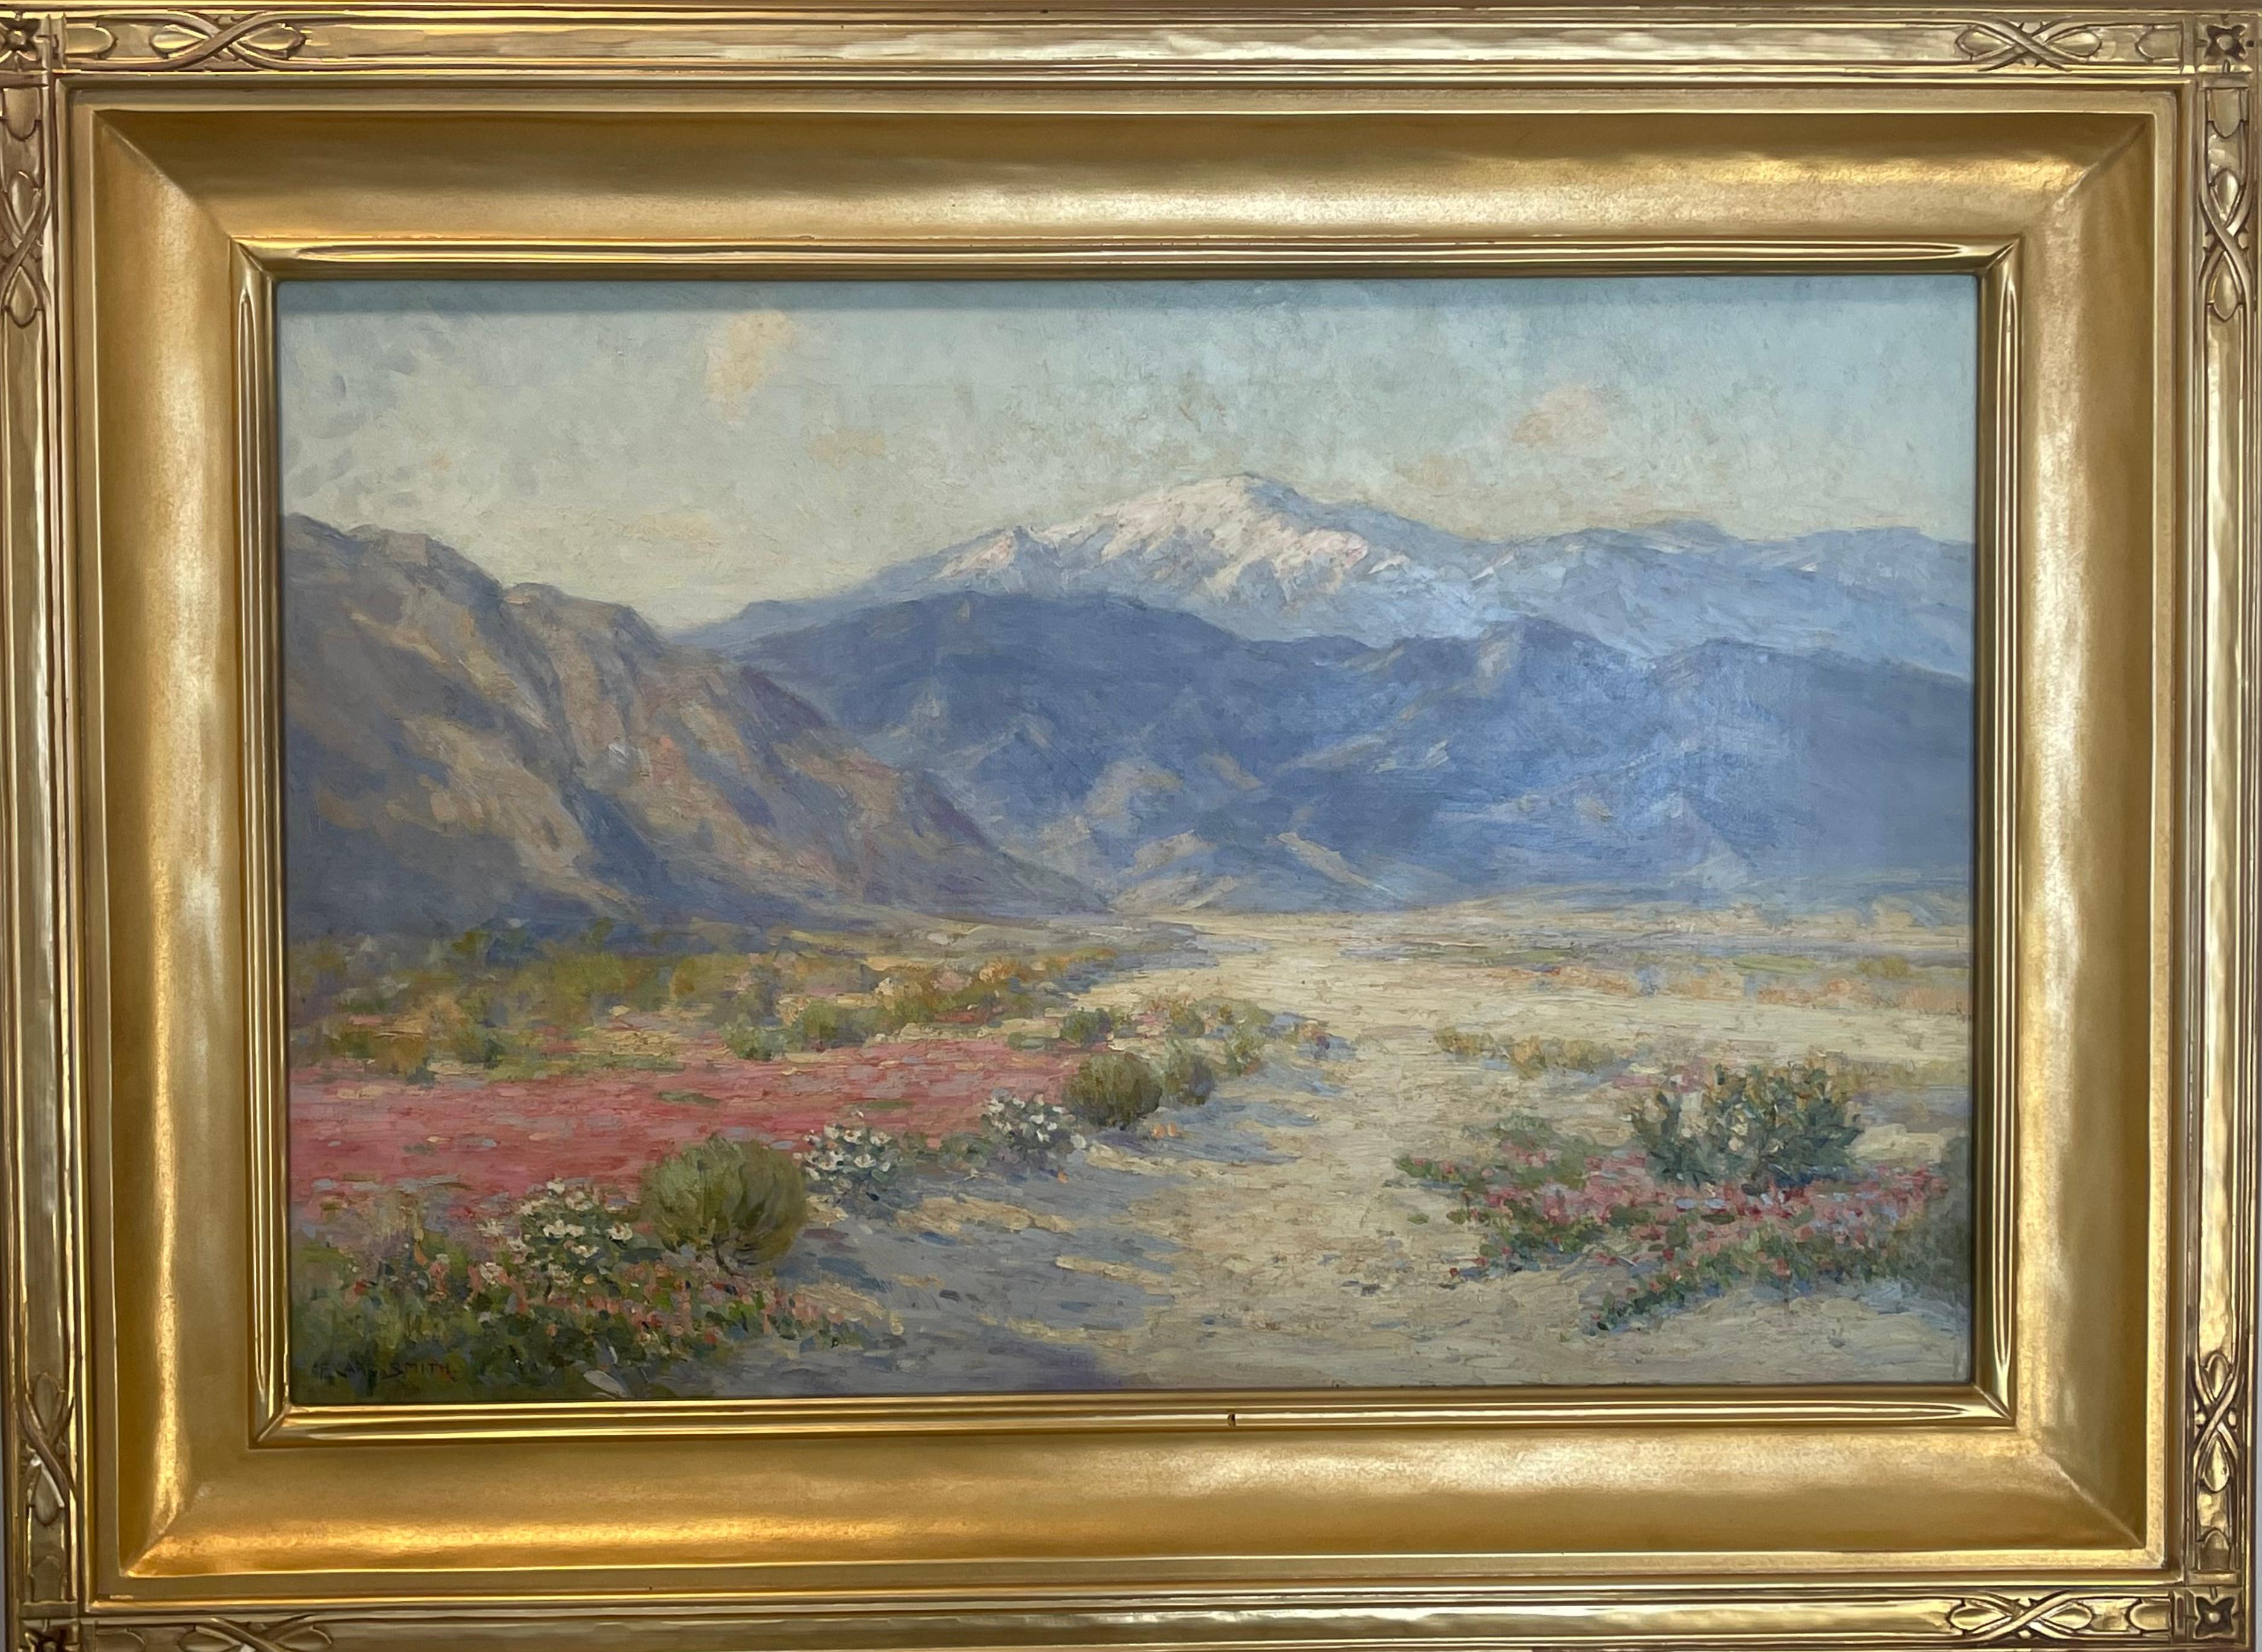 Wild Flowers Verbena in High Desert Palm Springs CA Pink & White Snowy Mountains - Painting by Frederick Carl Smith